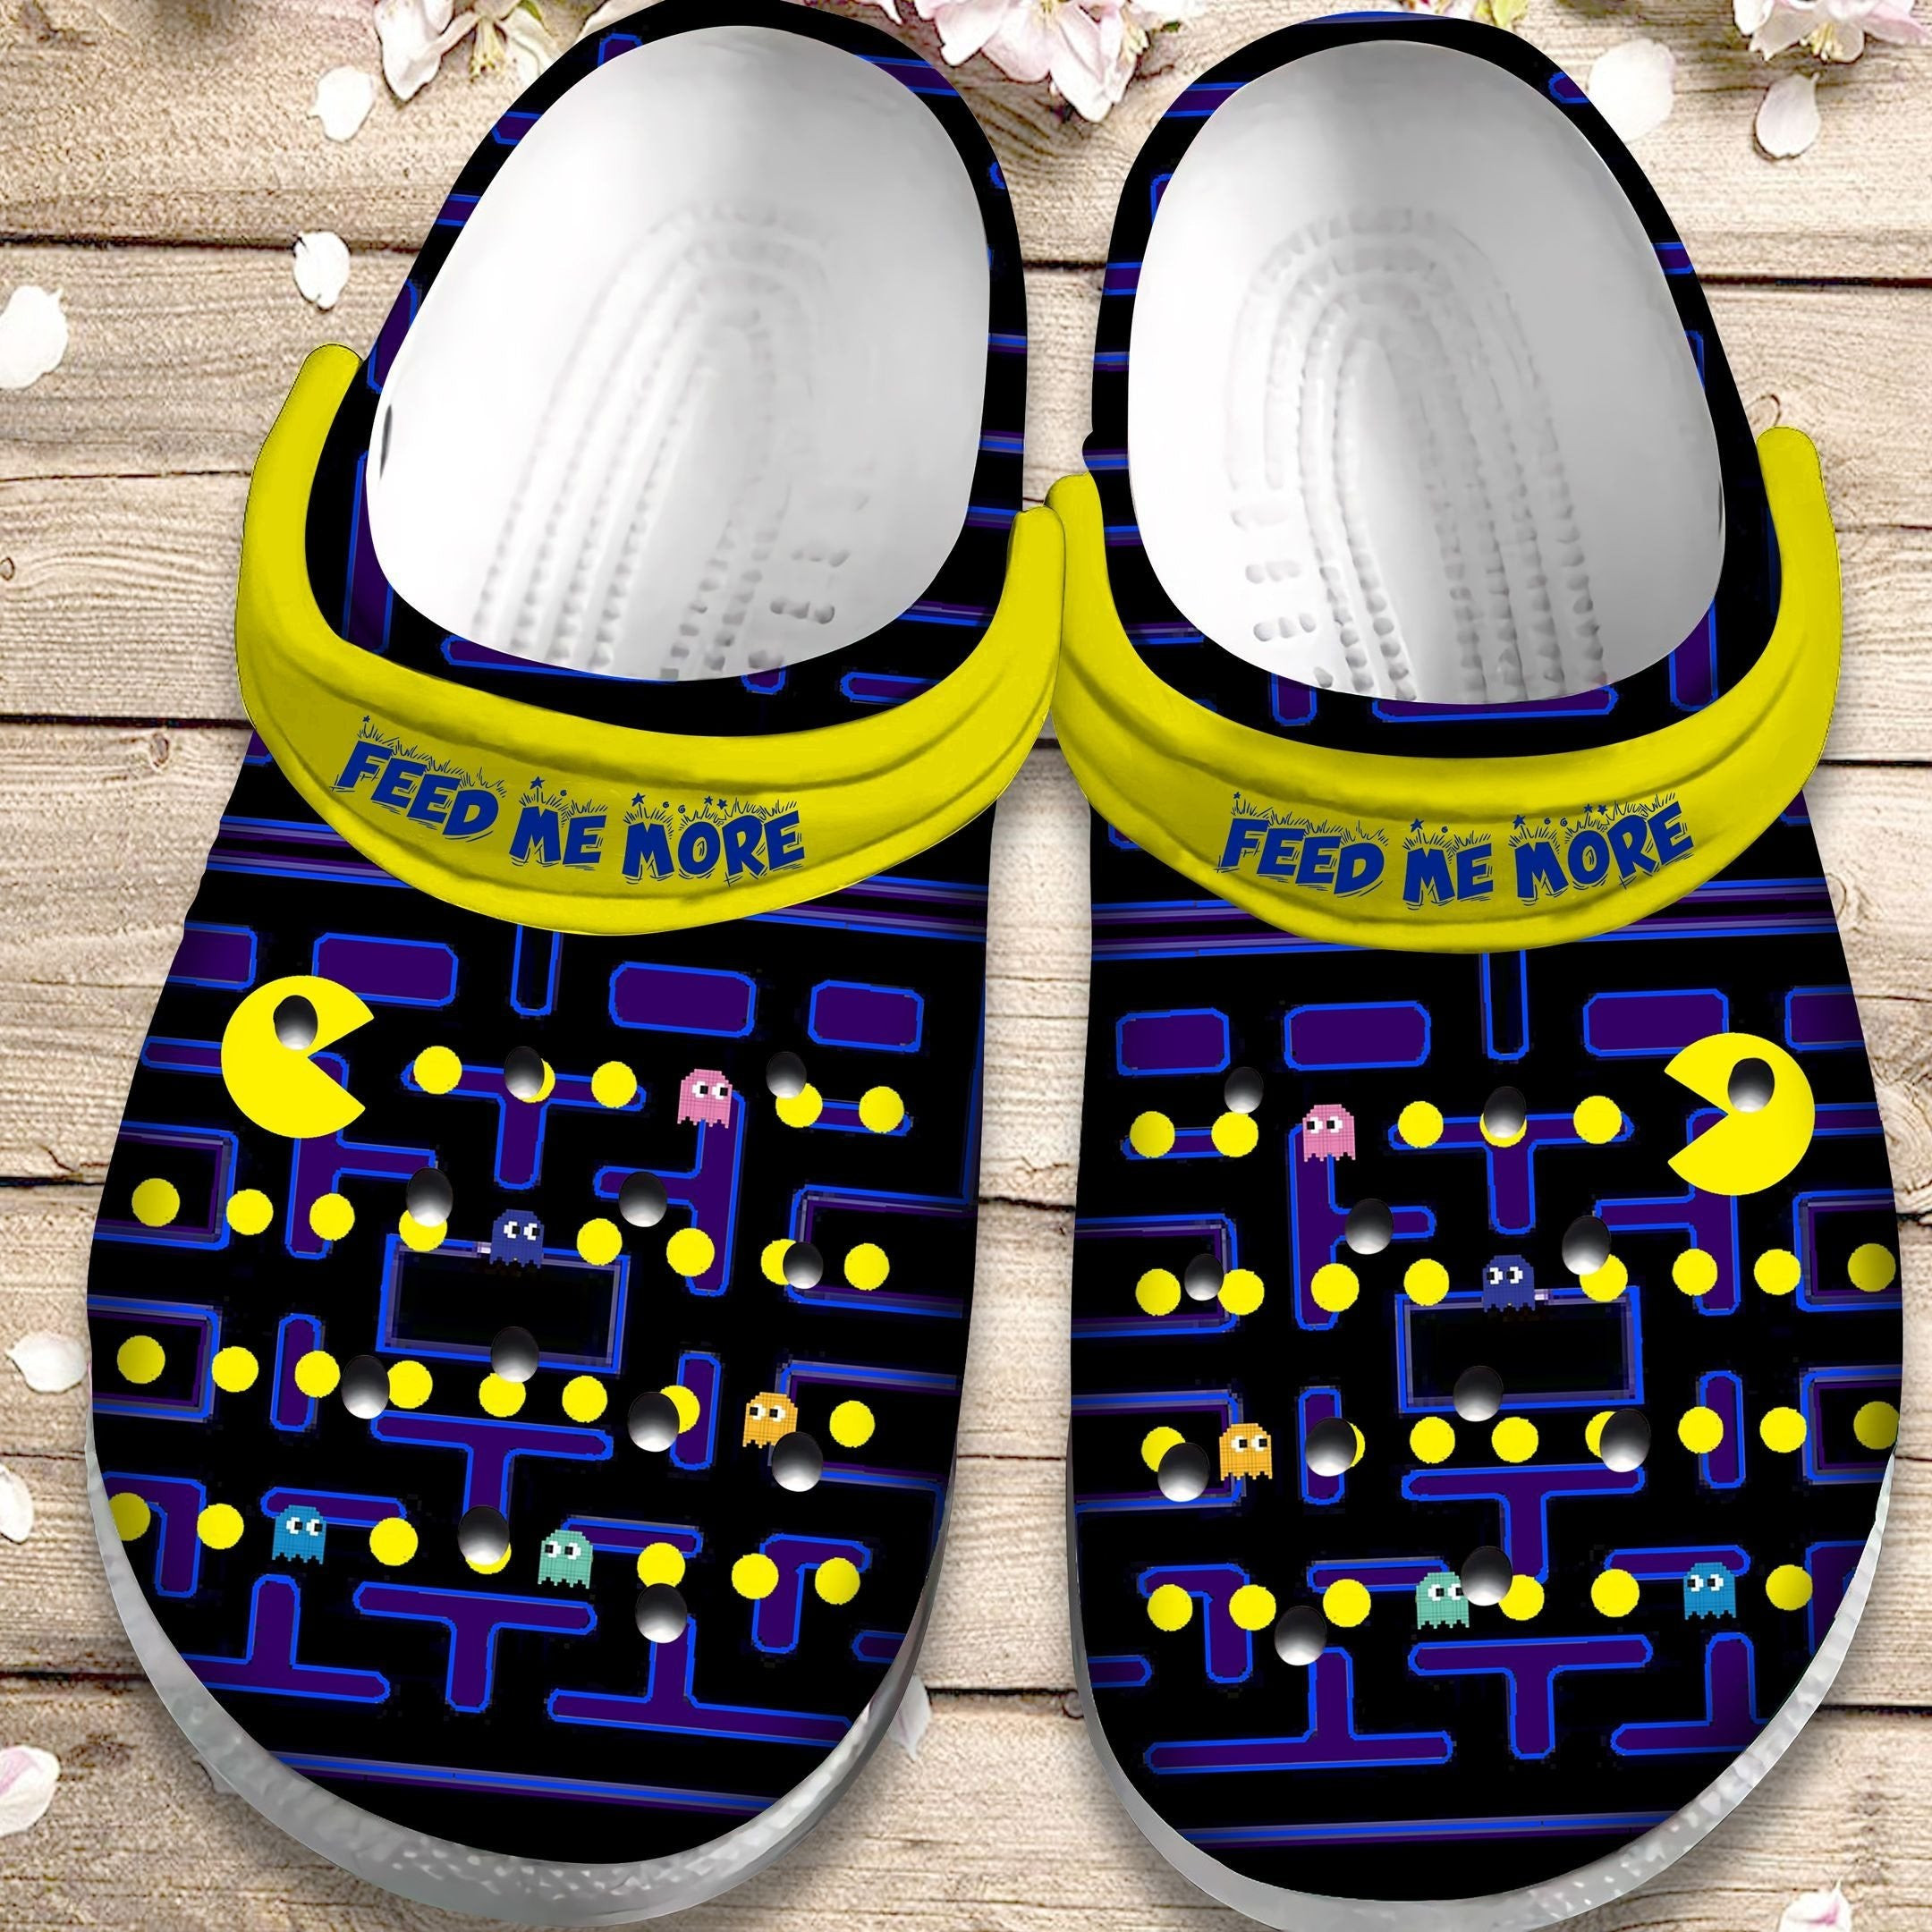 Feed Me More Shoes - Funny Game Crocs Clog Gift For Kids Children